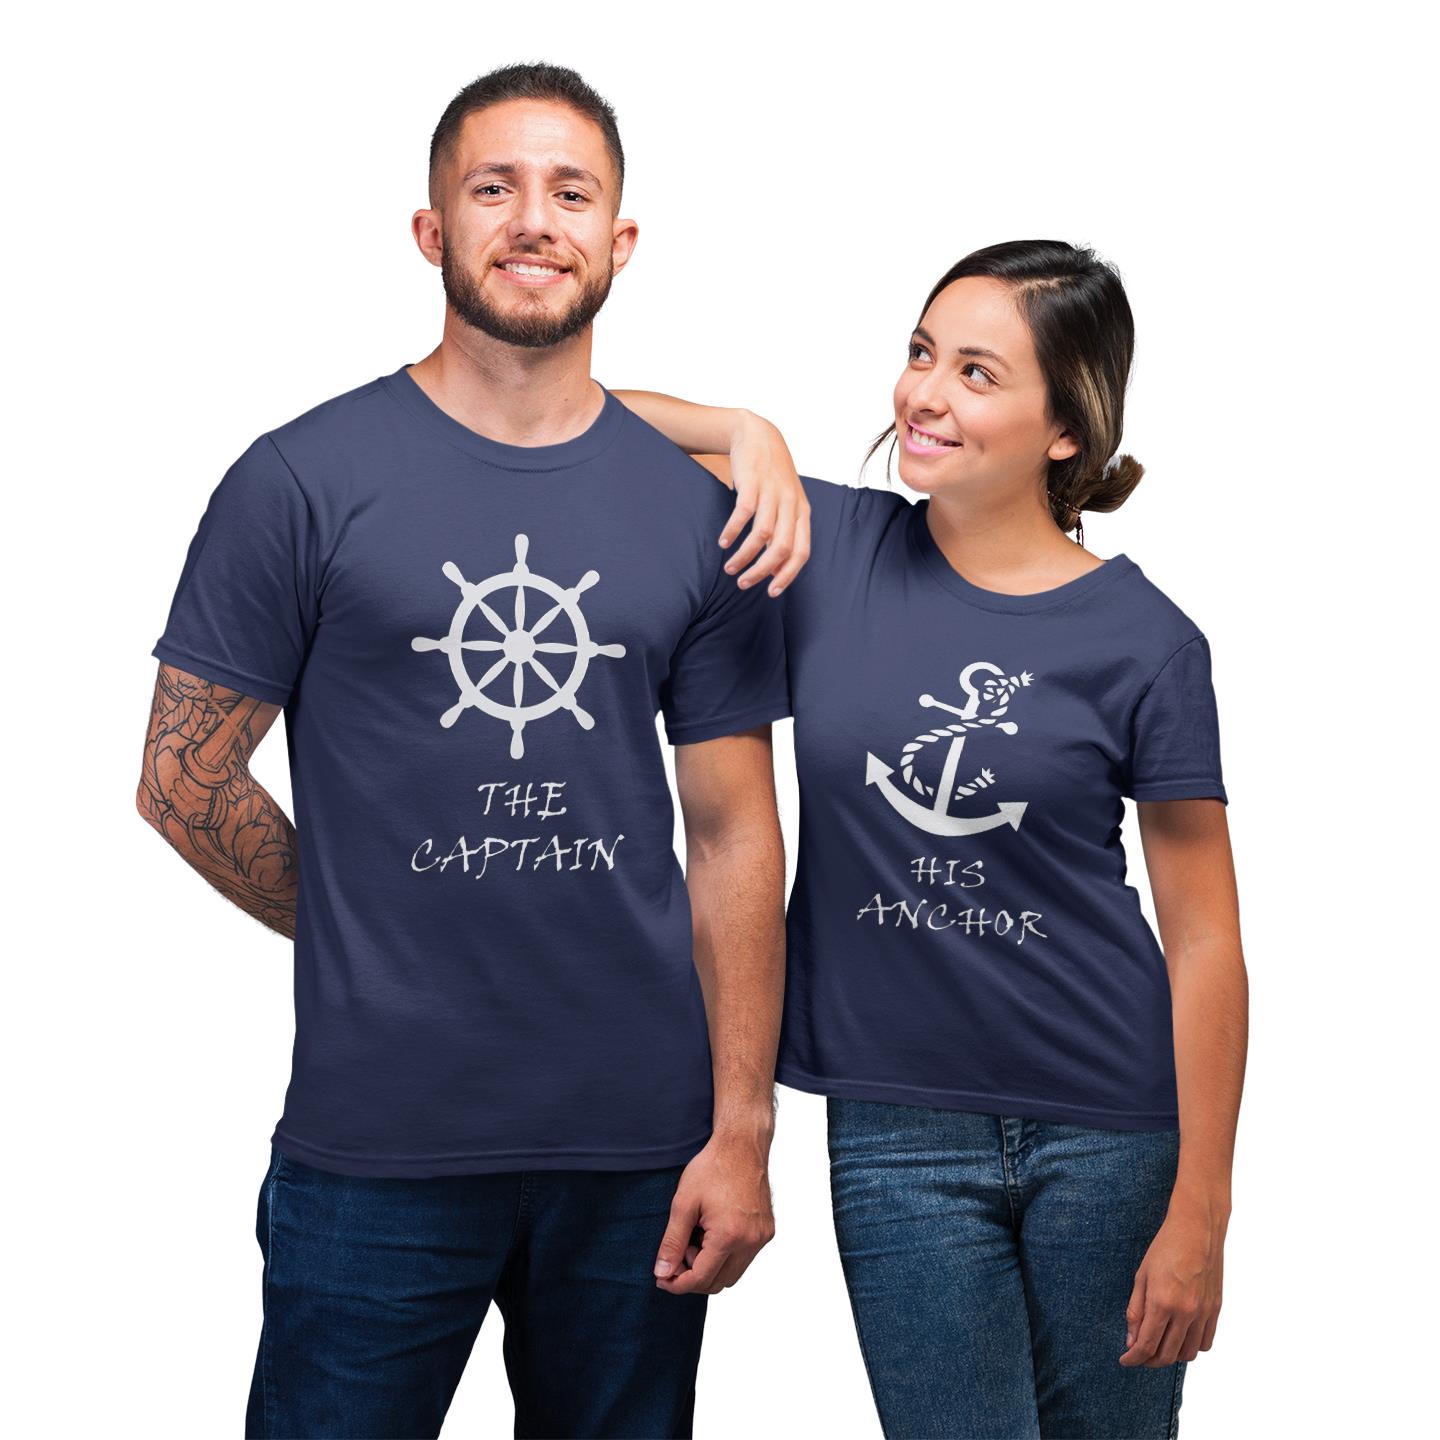 The Captain His Anchor Matching Couples T-Shirts